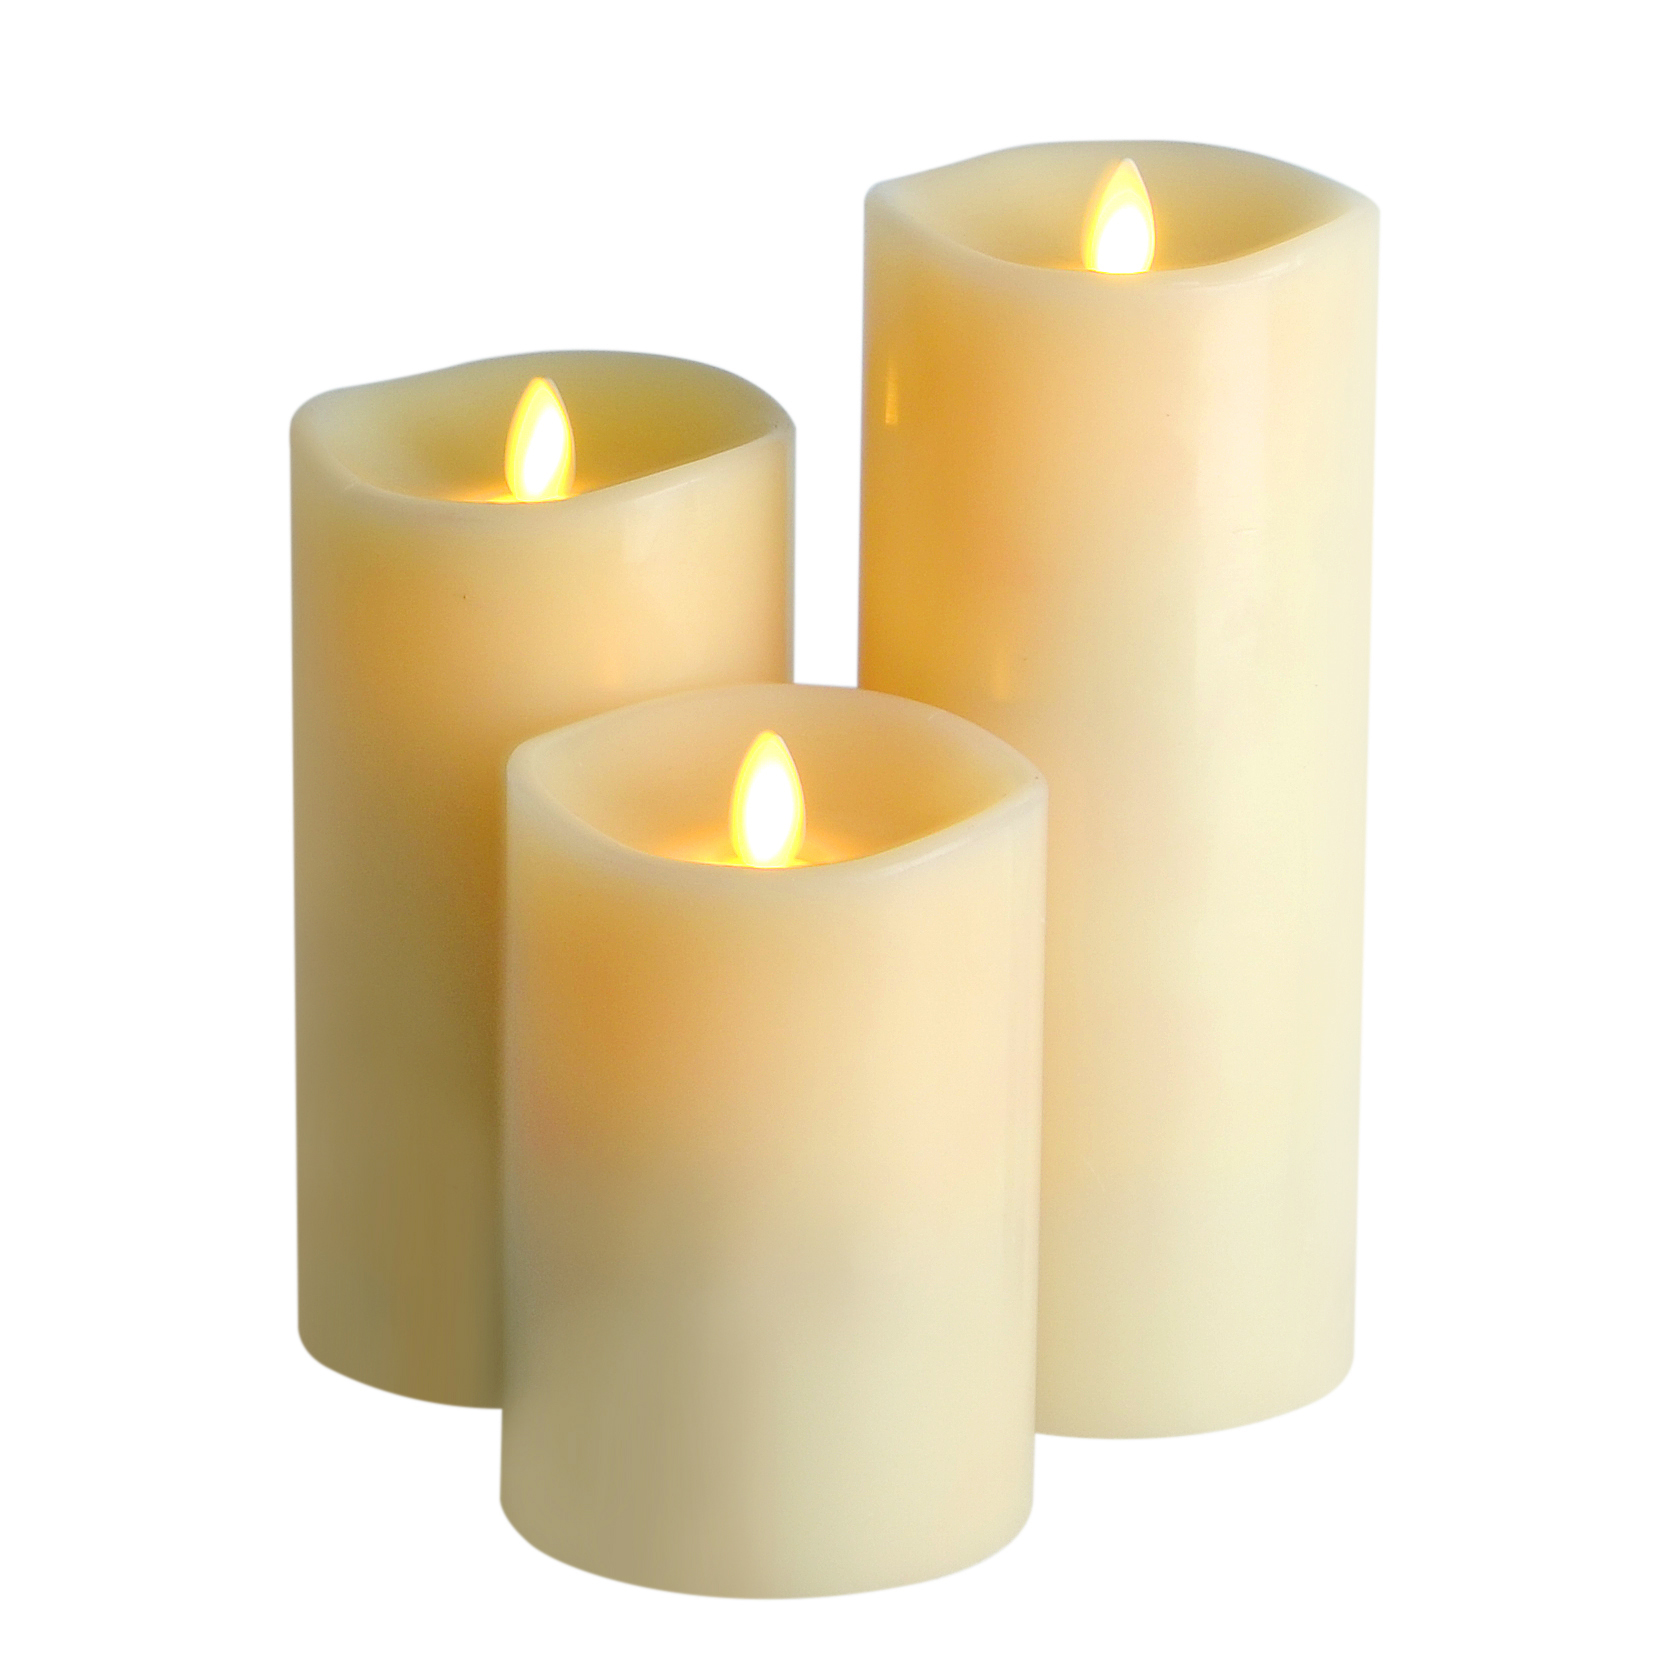 Small wave led flameless pillar candles